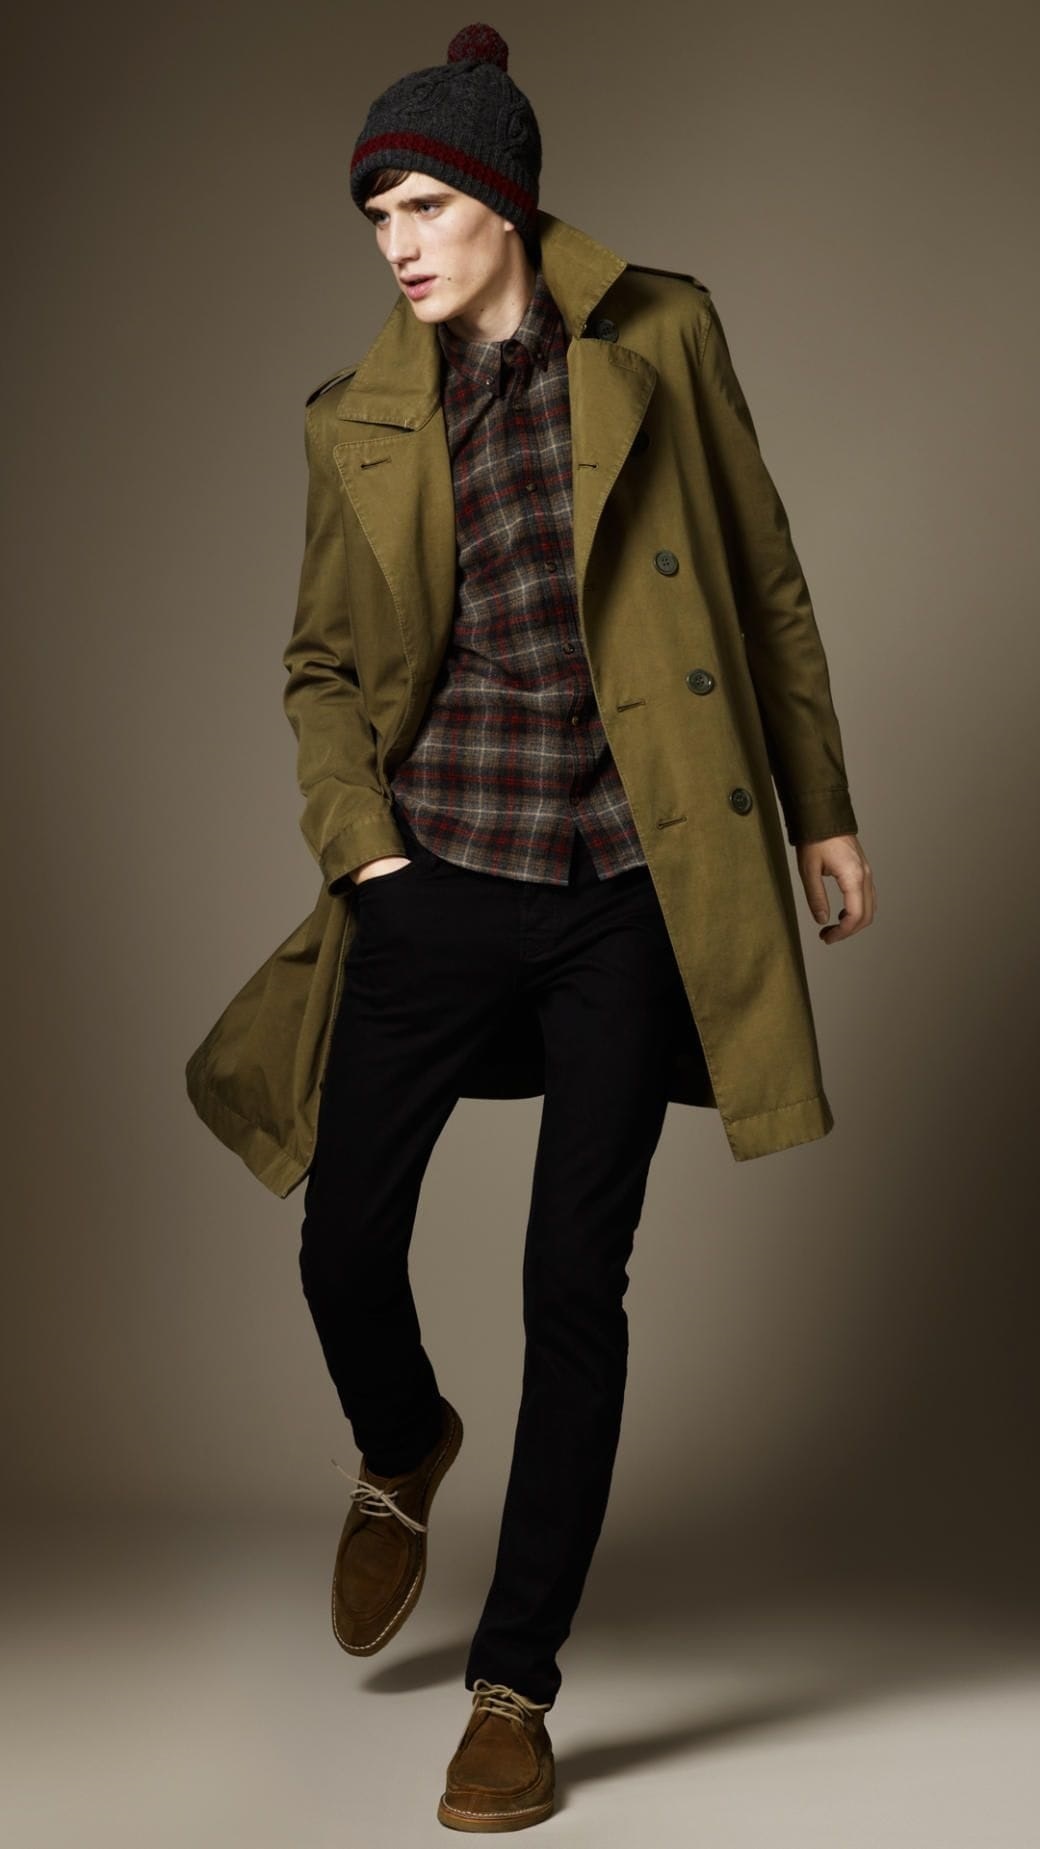 Men's Fall Fashion Staples 2018, trench coat, men's Burberry olive green trench coat